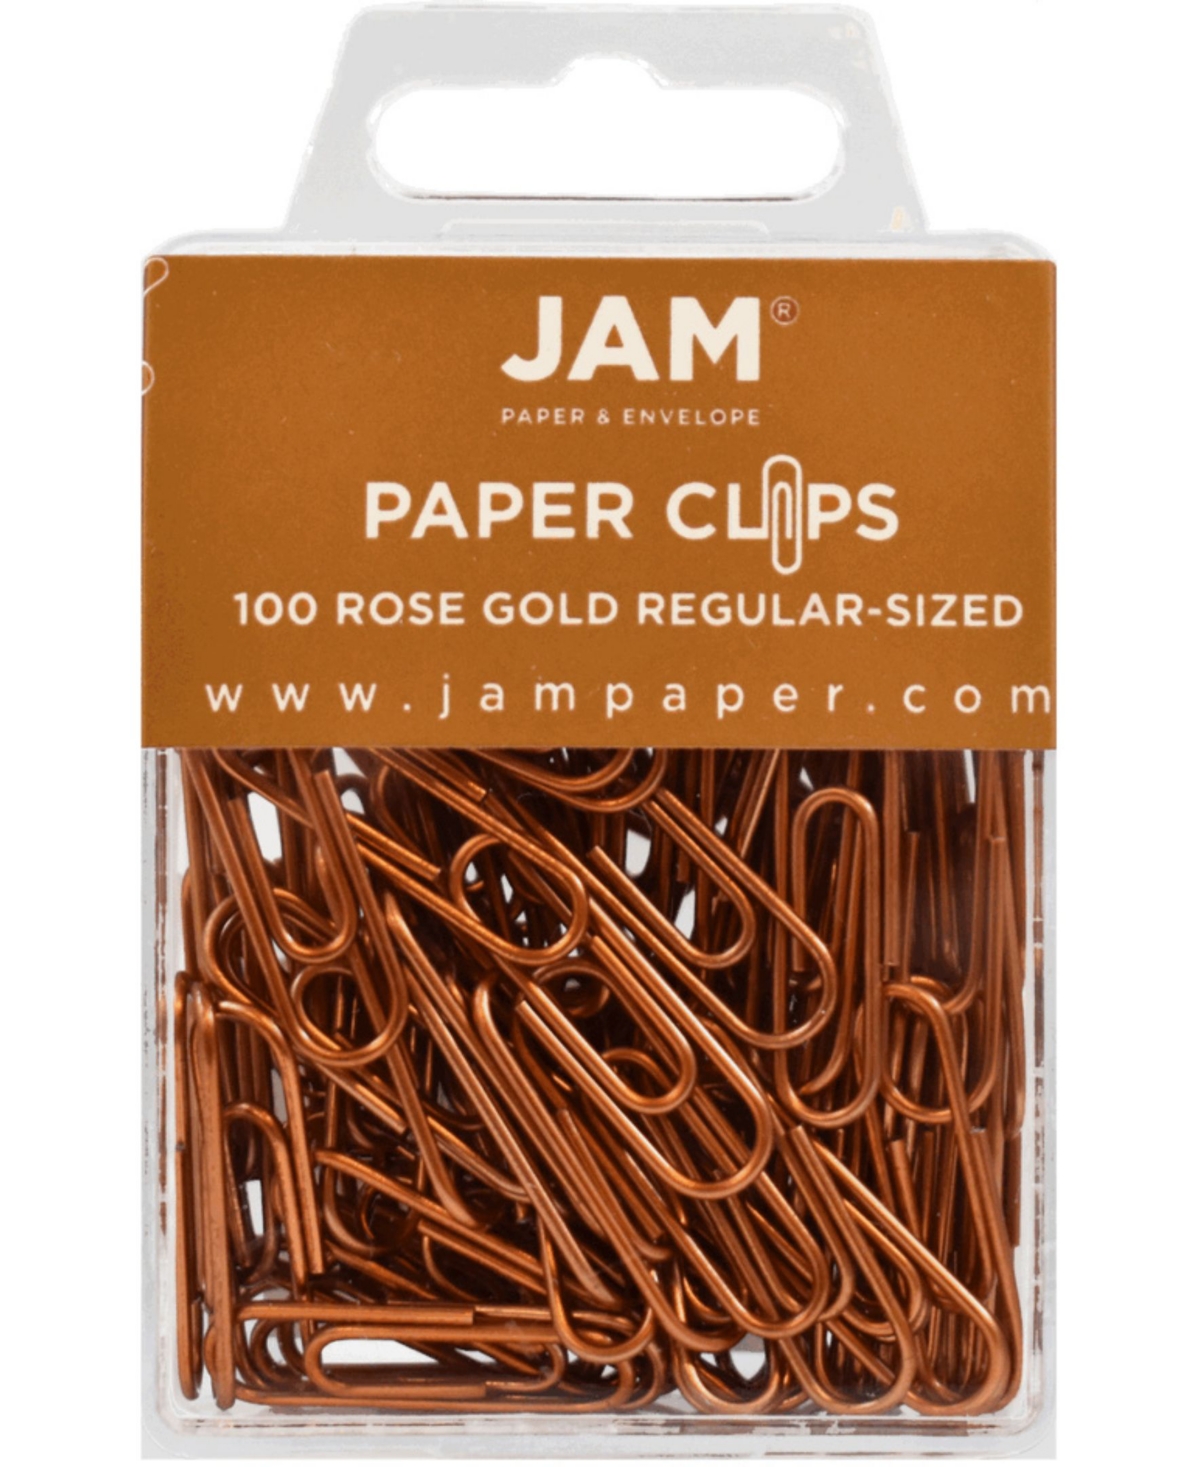 Jam Paper Colorful Standard Paper Clips In Rose Gold